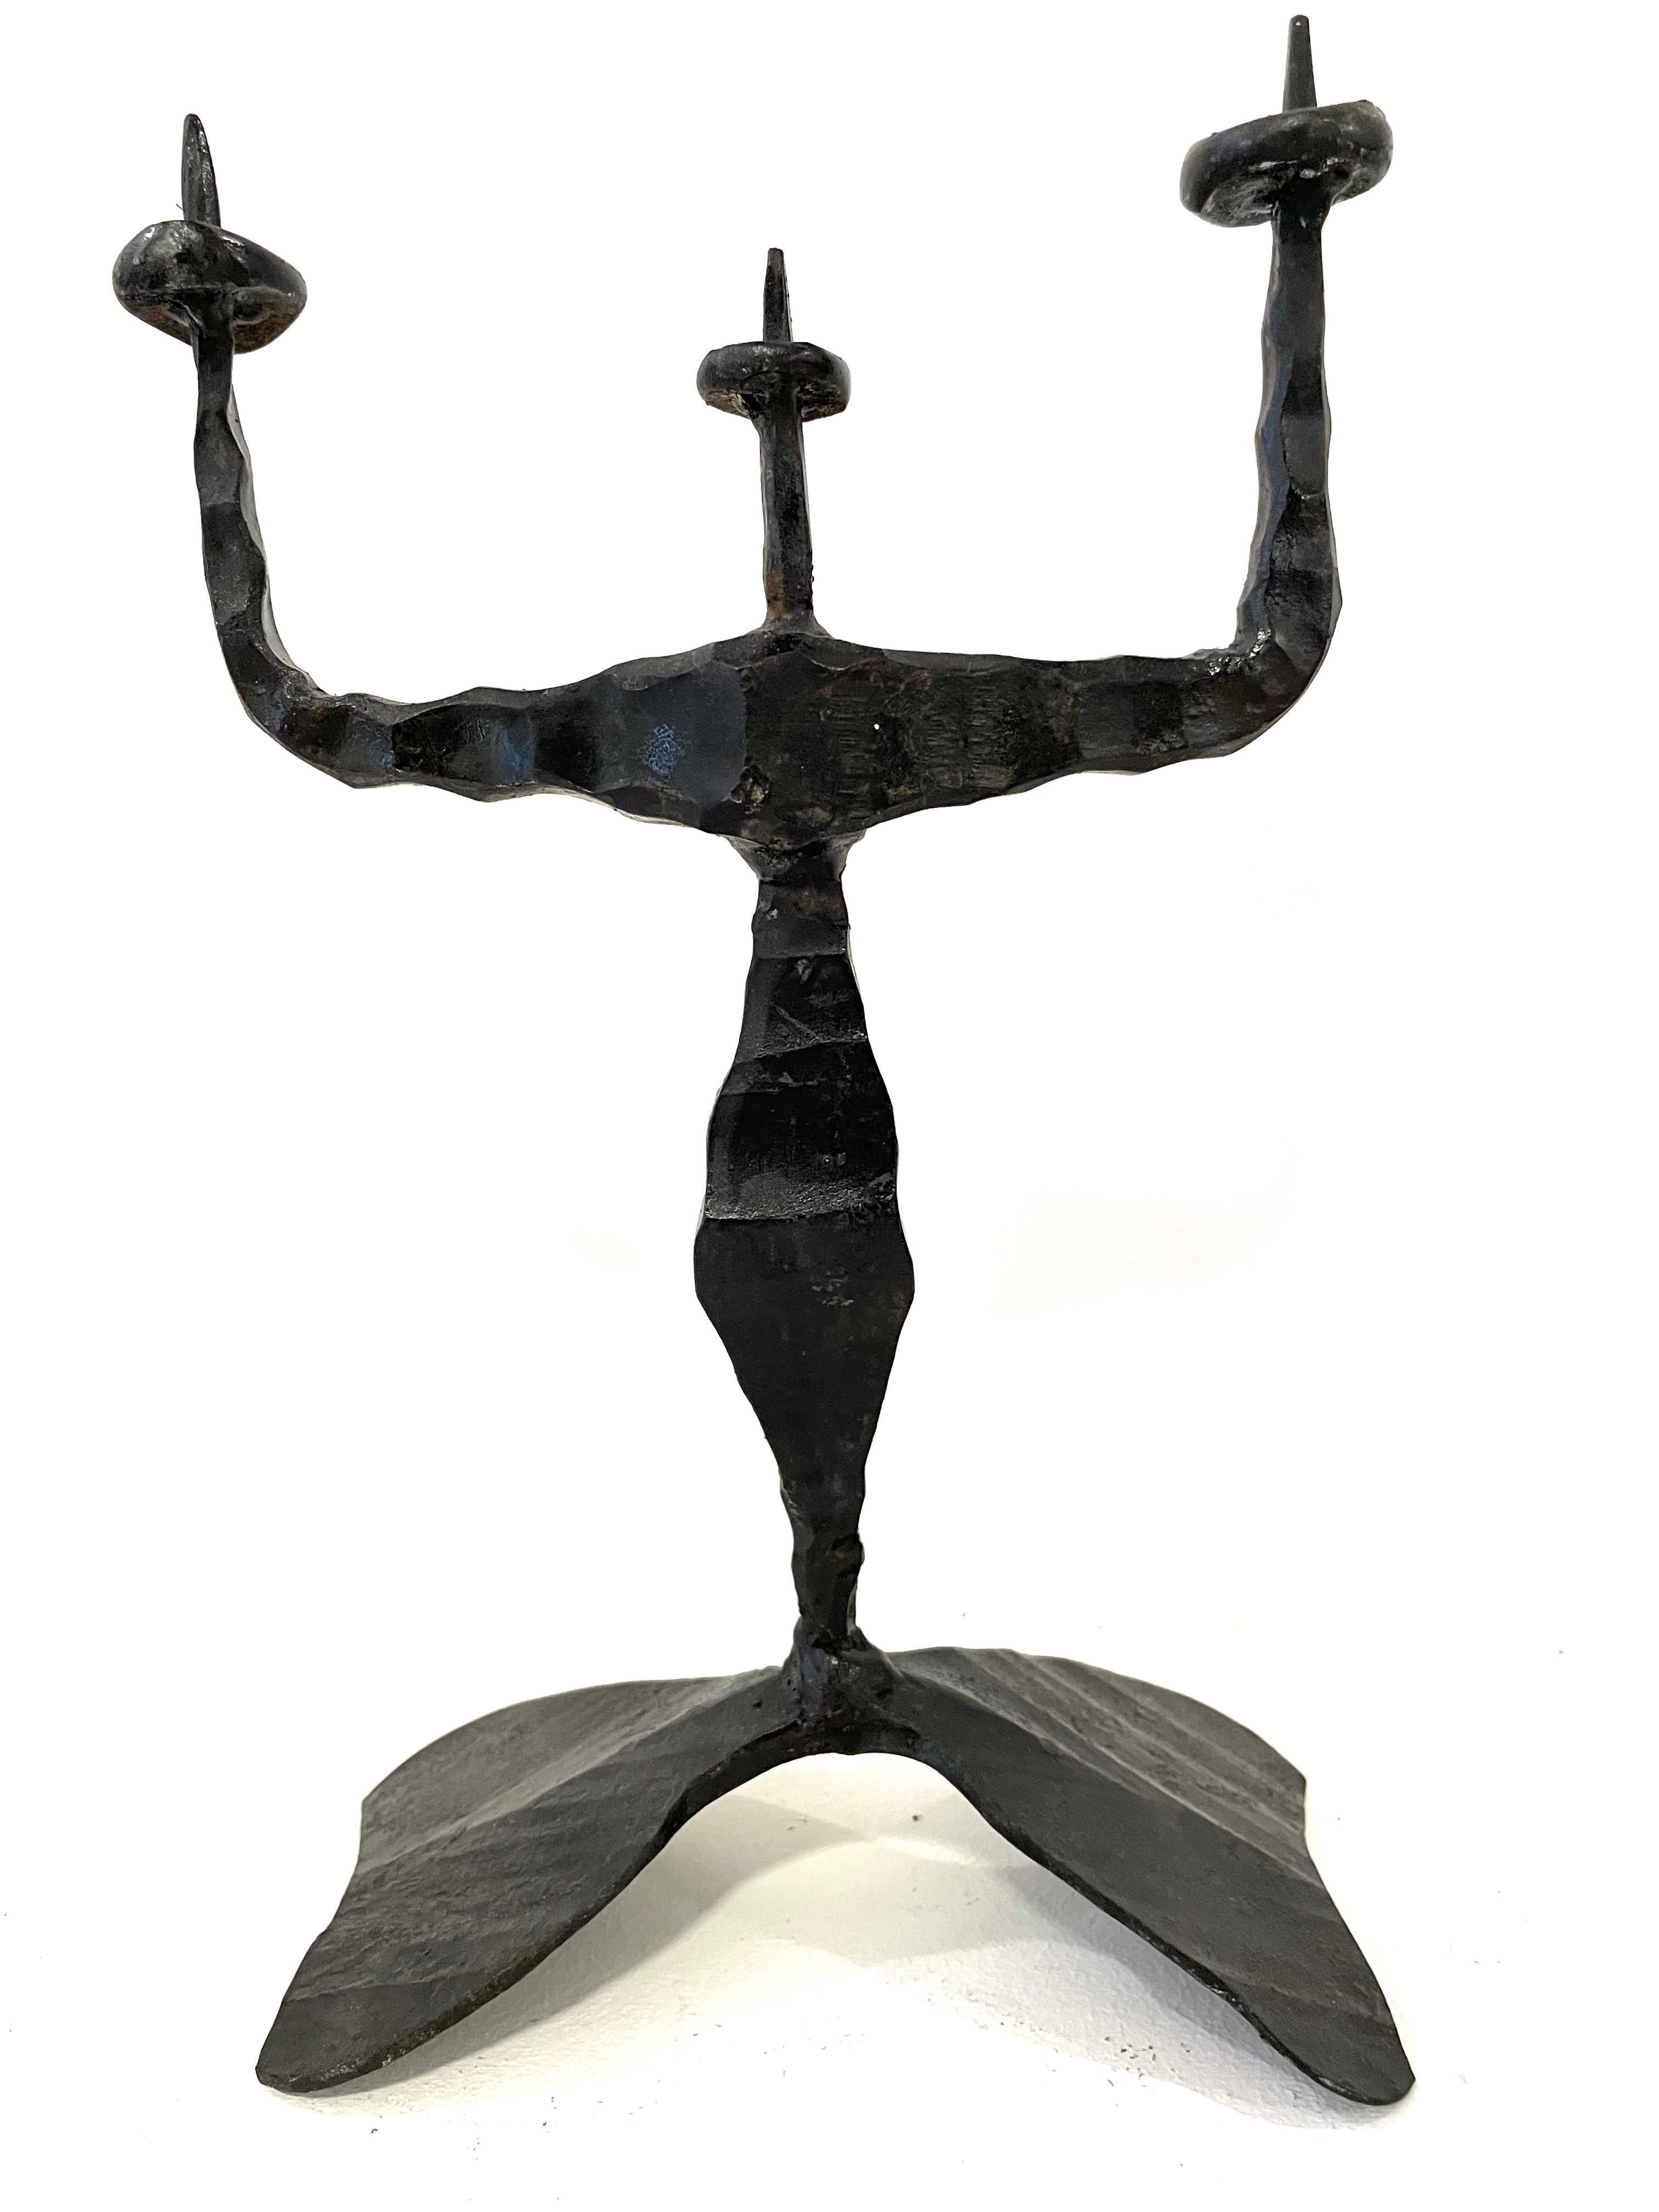 Hand forged, iron Shabbat candlesticks in the style known as 